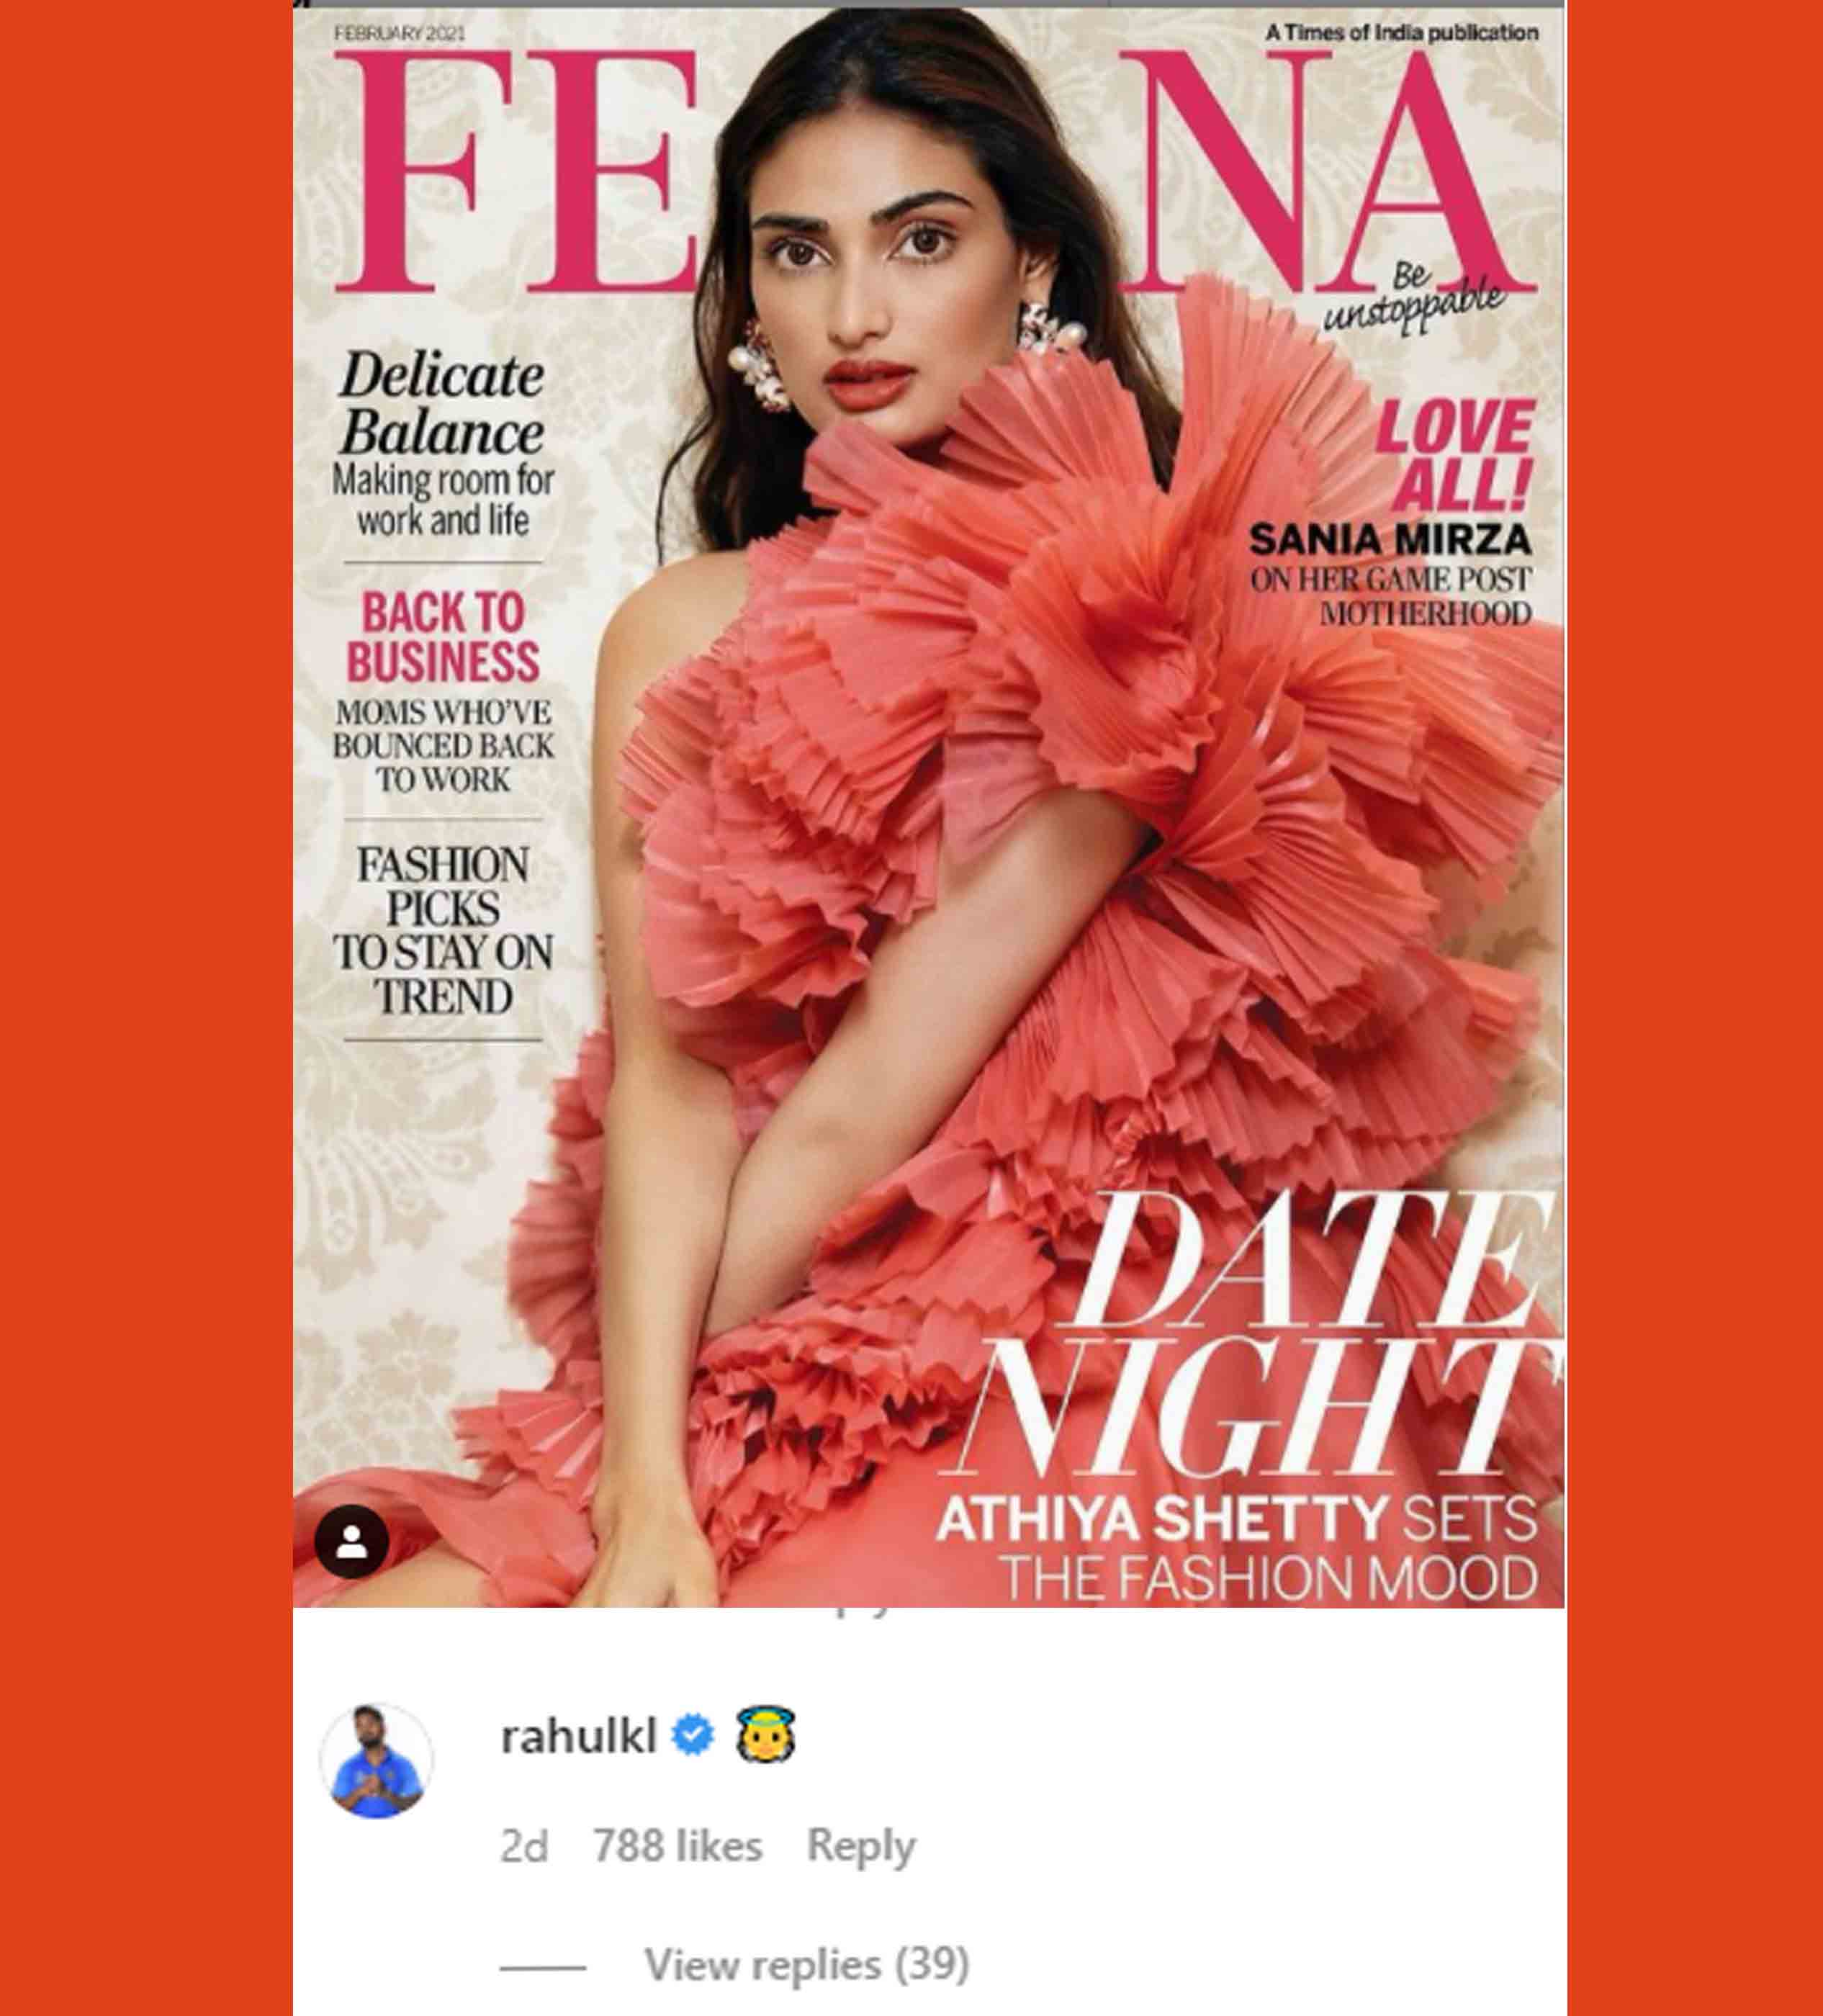 Cricketer Kl Rahul Has This To Say About Athiya Shetty S Newest Journal Cowl Look Leaves Followers Gushing People News Latestbollywood